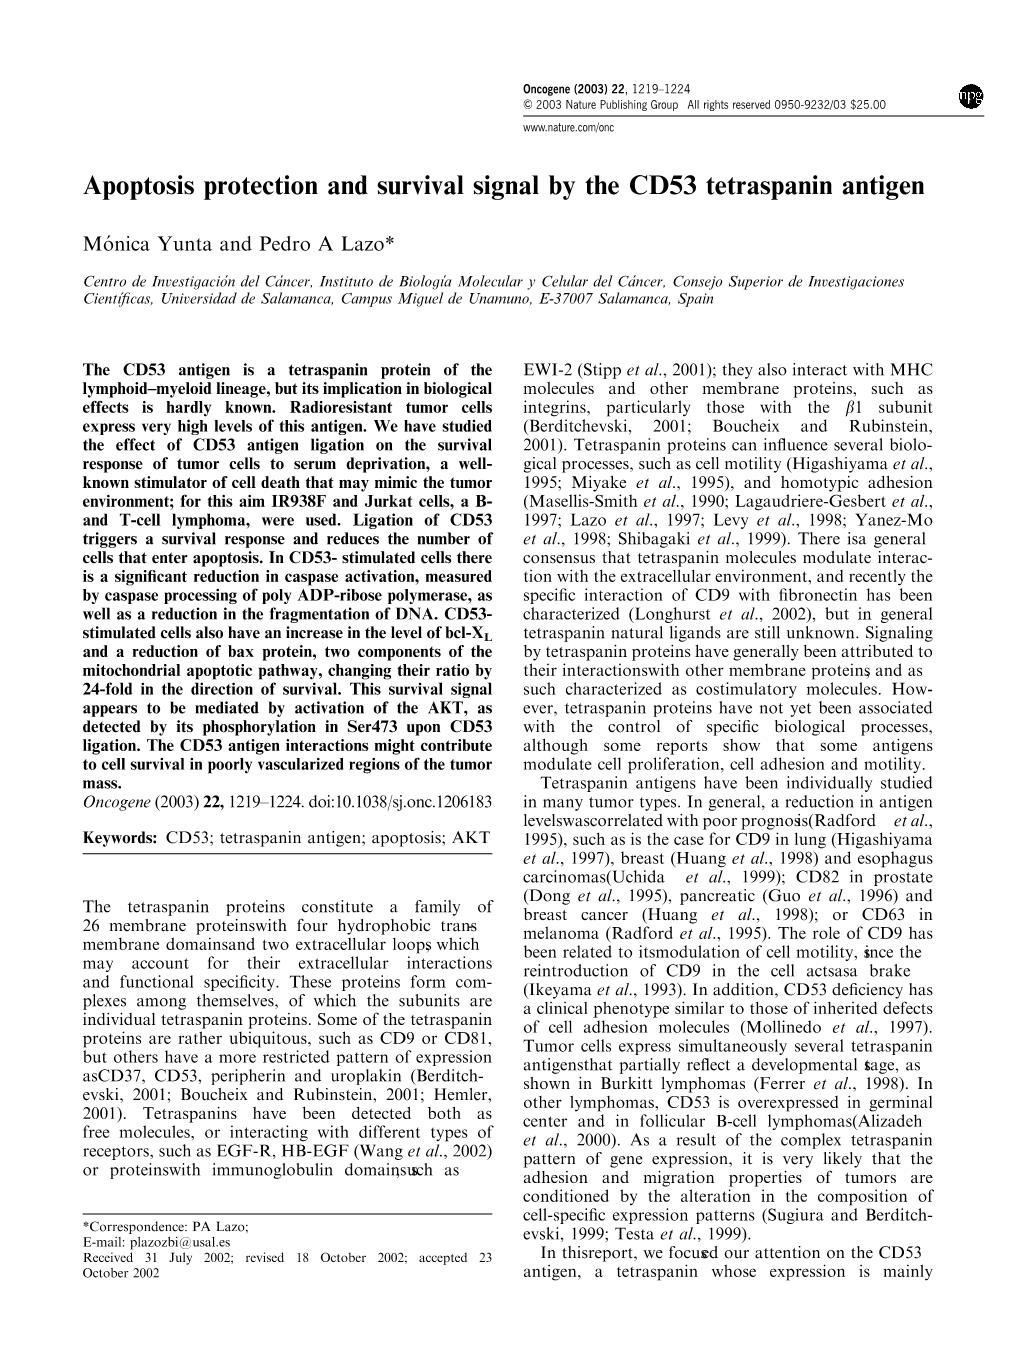 Apoptosis Protection and Survival Signal by the CD53 Tetraspanin Antigen